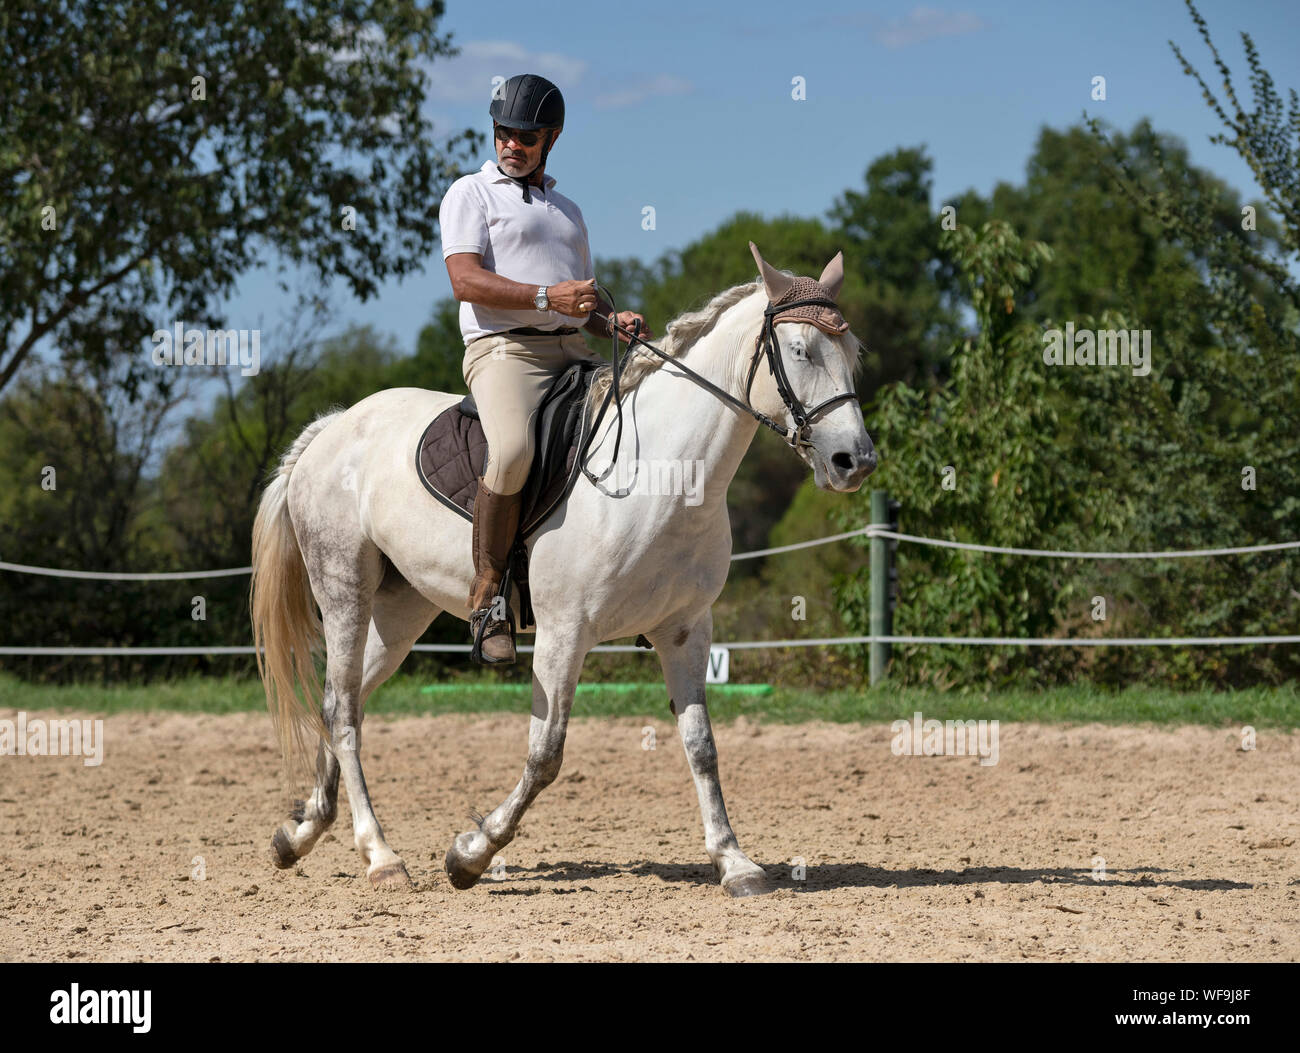 langzaam Manie ozon riding man, are training her young horse Stock Photo - Alamy